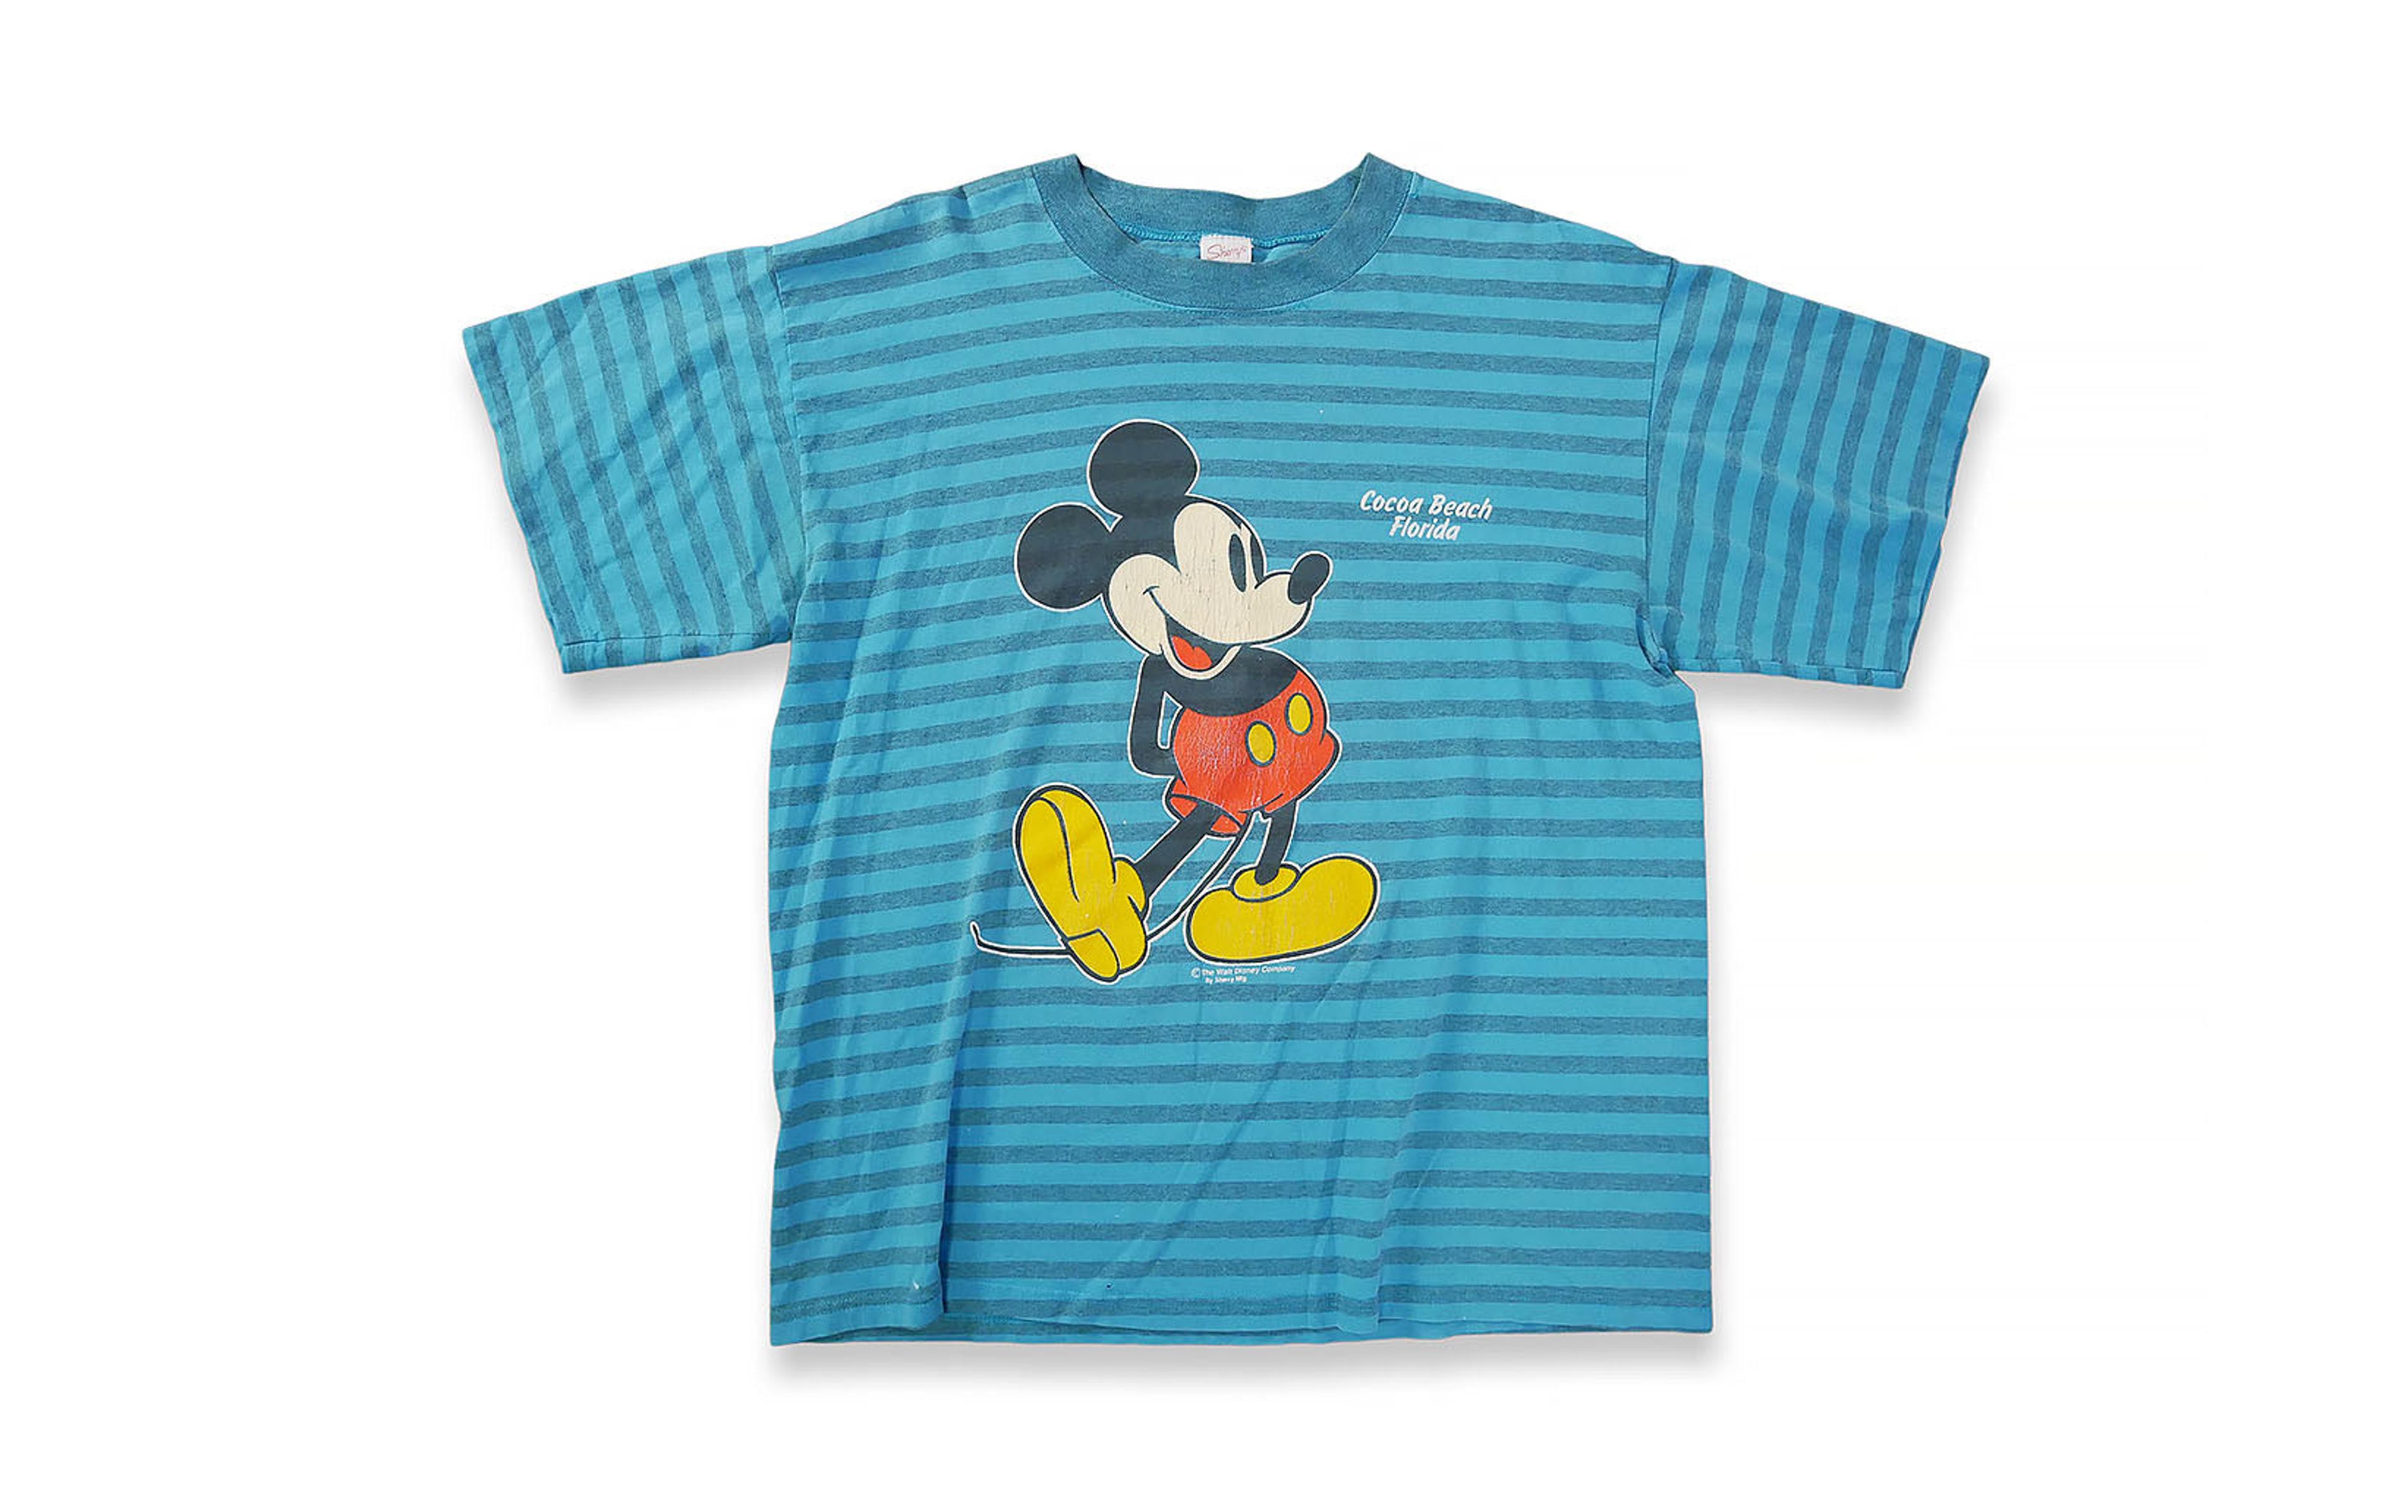 VINTAGE MICKEY MOUSE T-SHIRT